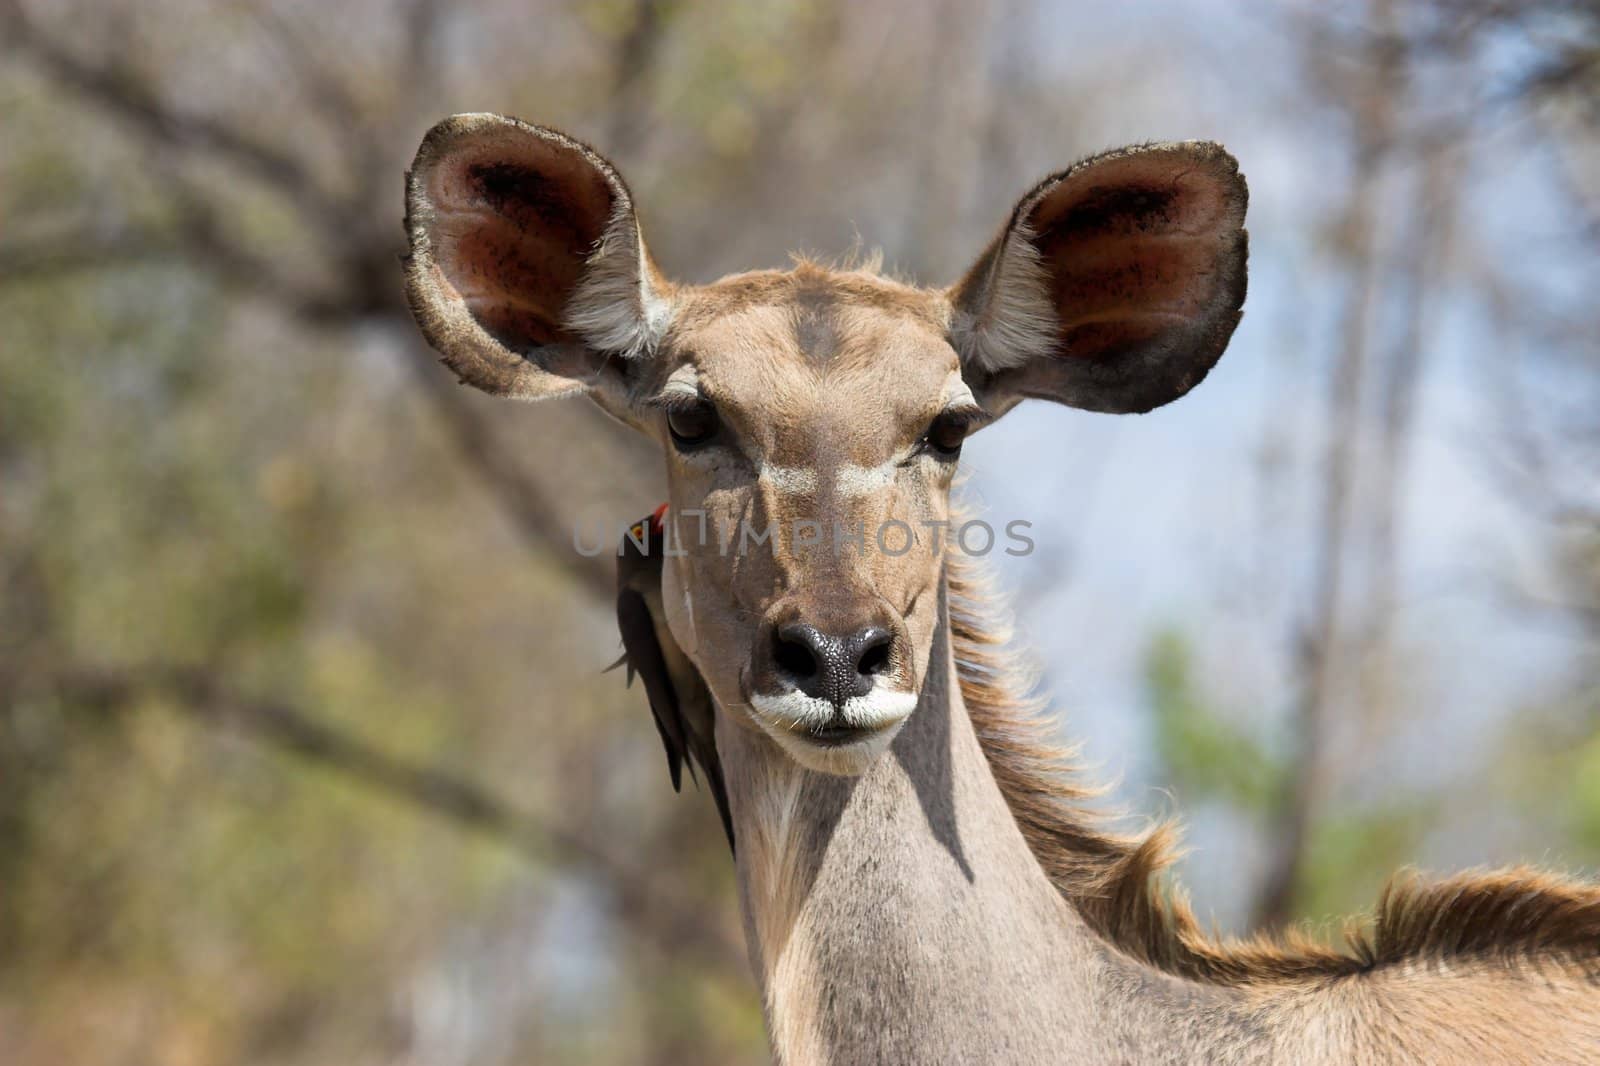 Kudu female with Oxpecker looking at the camera